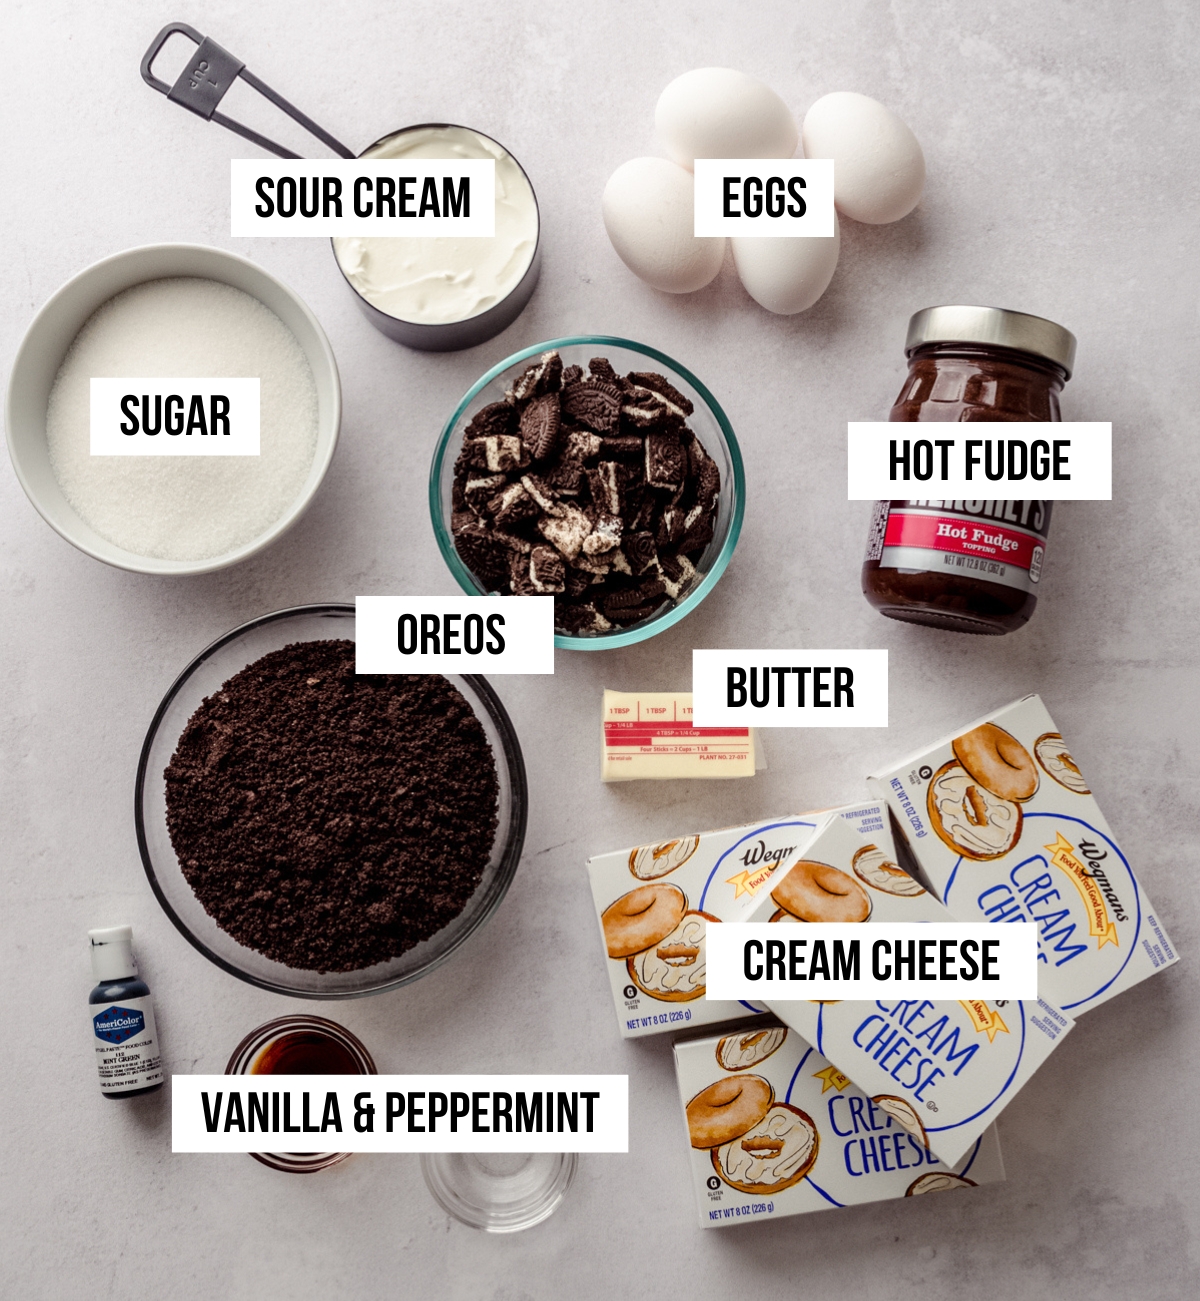 Aerial photo of ingredients for mint chocolate cheesecake with text overlay.